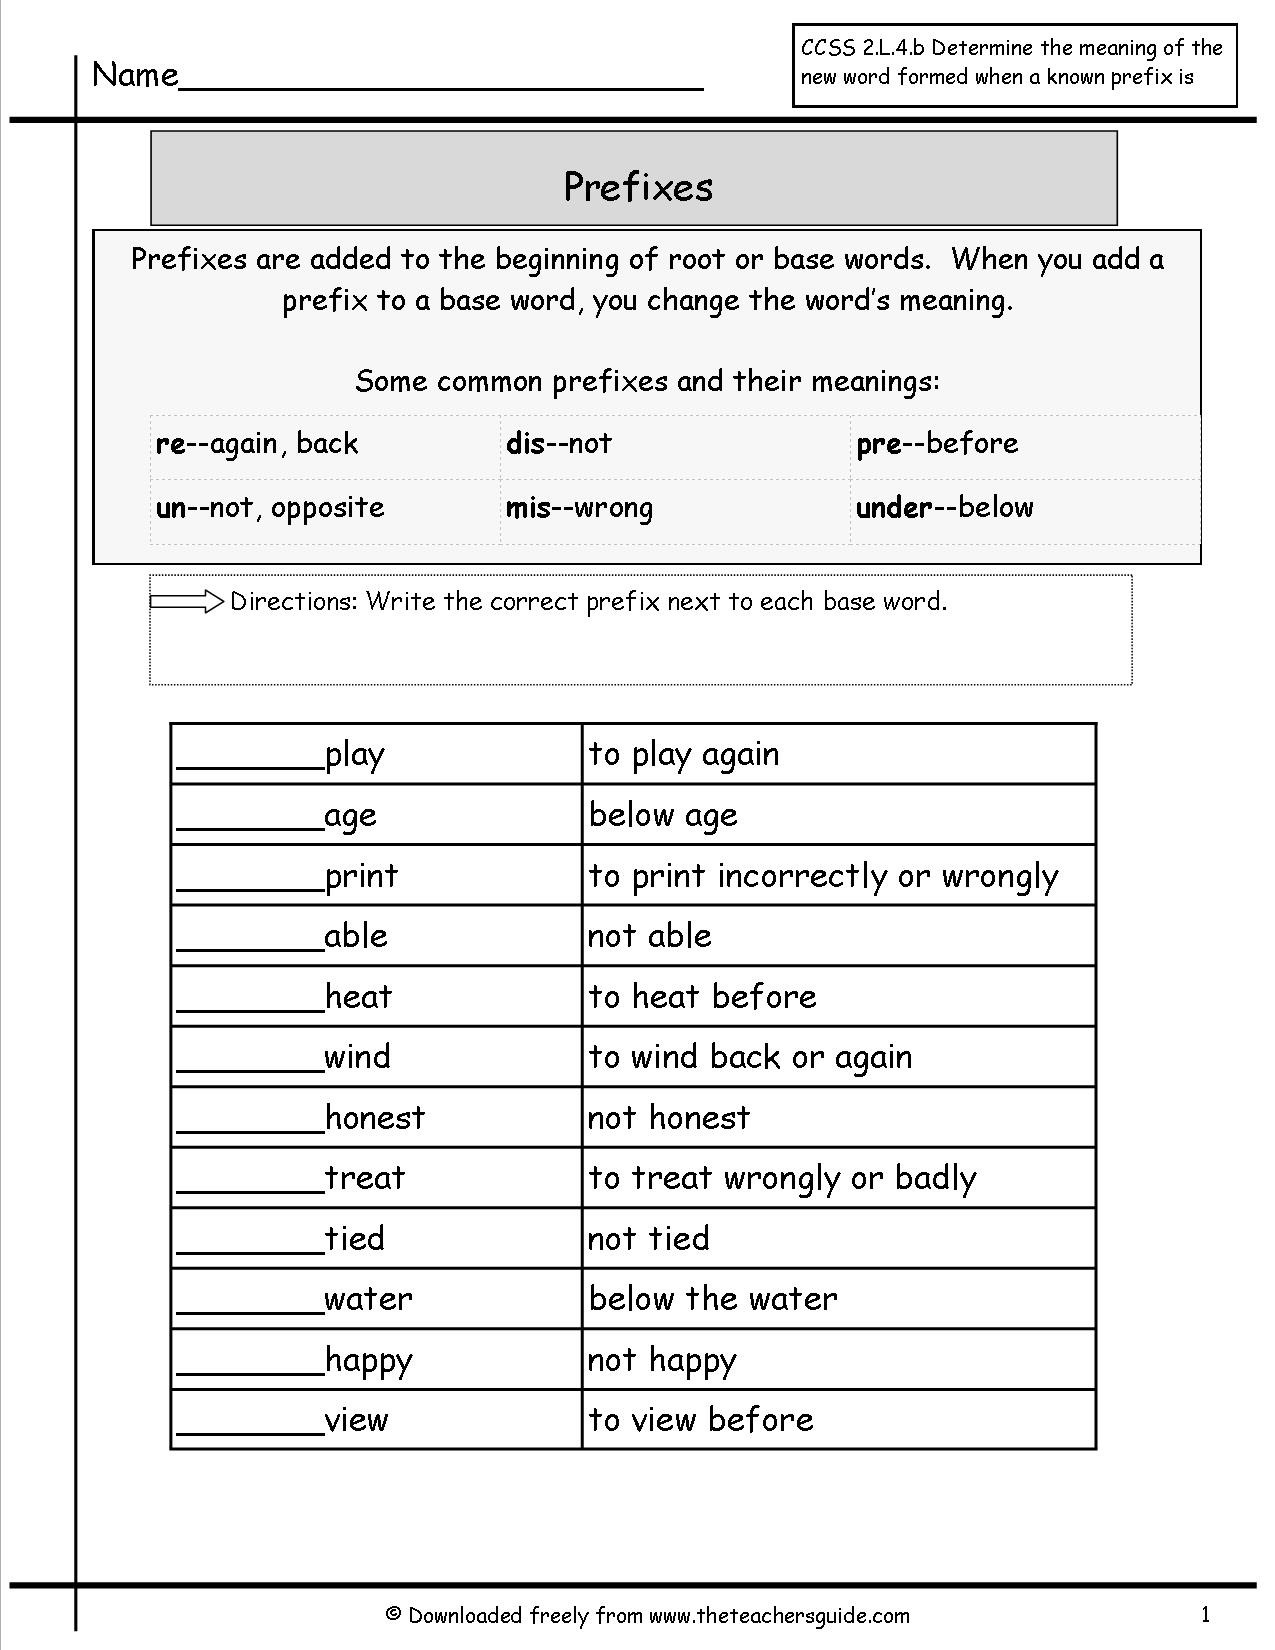 Prefix Suffix Worksheets 3rd Grade Free Prefixes and Suffixes Worksheets From the Teacher S Guide